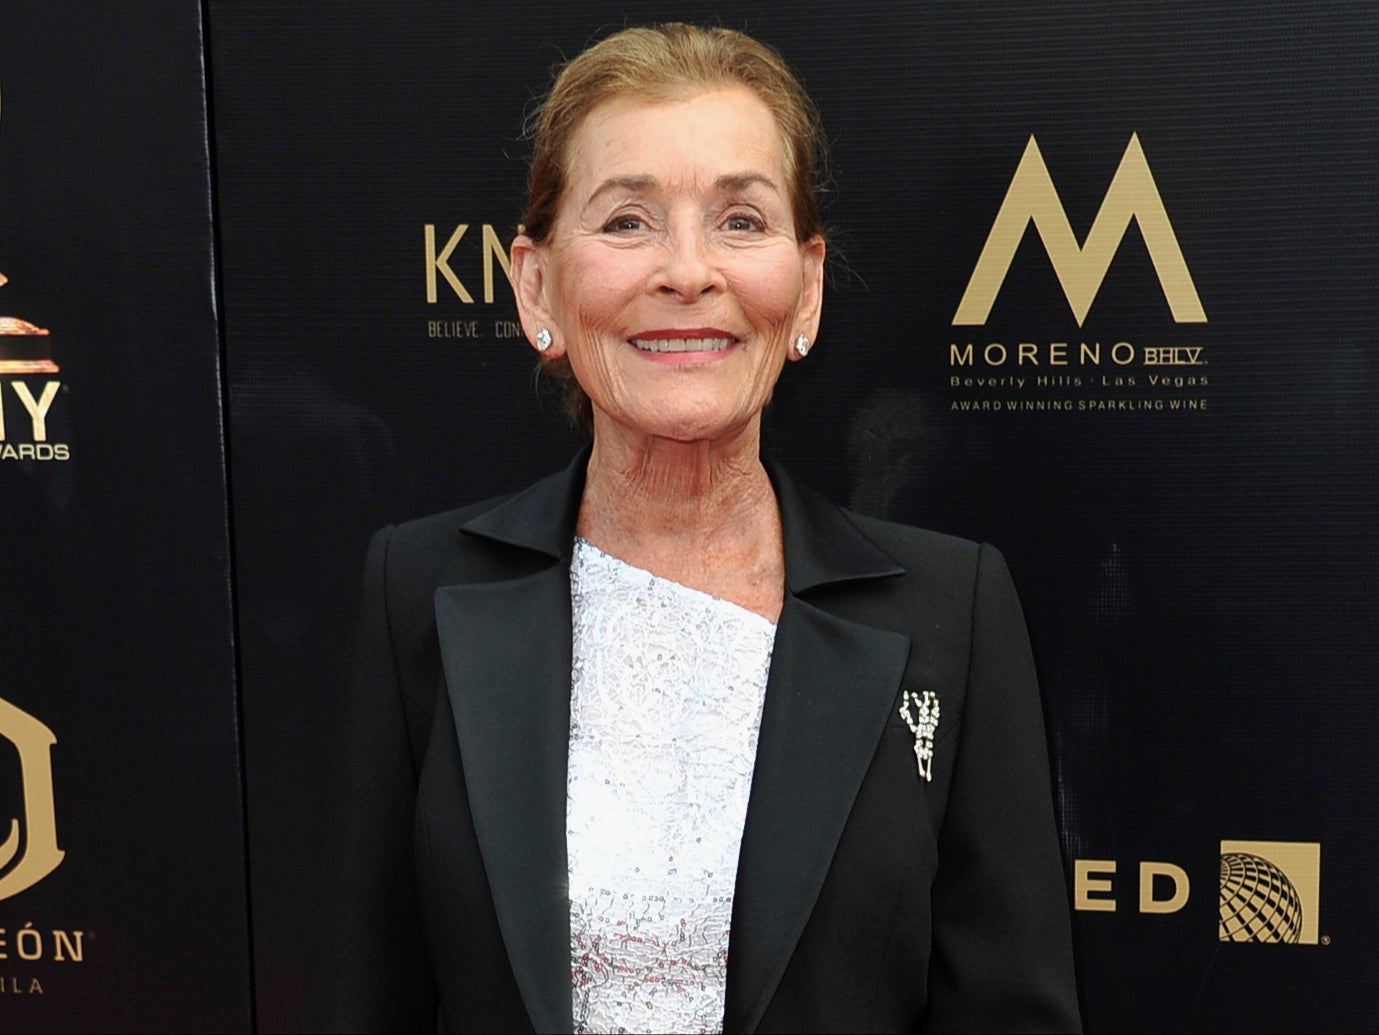 Judy Sheindlin, also known as Judge Judy, pictured in 2019